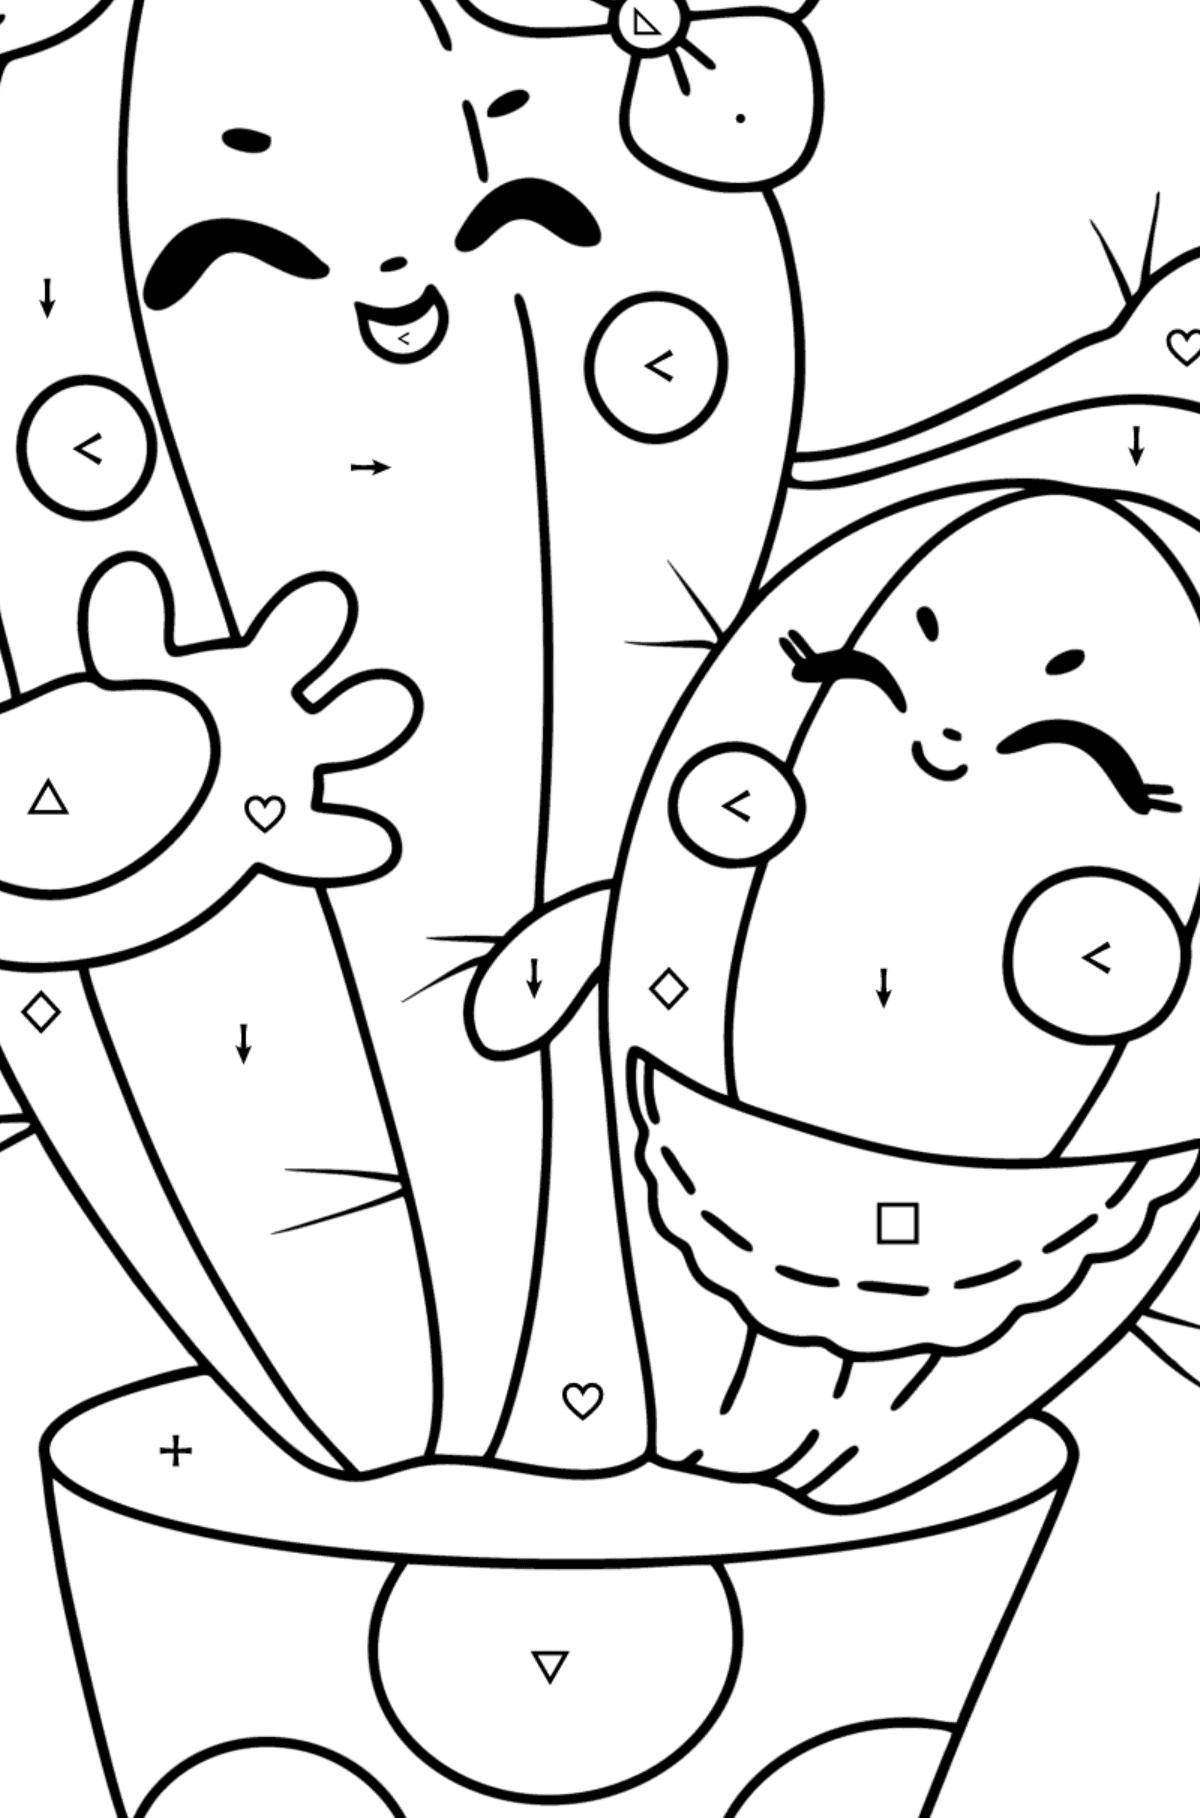 Cartoon Cactus coloring page - Coloring by Symbols and Geometric Shapes for Kids